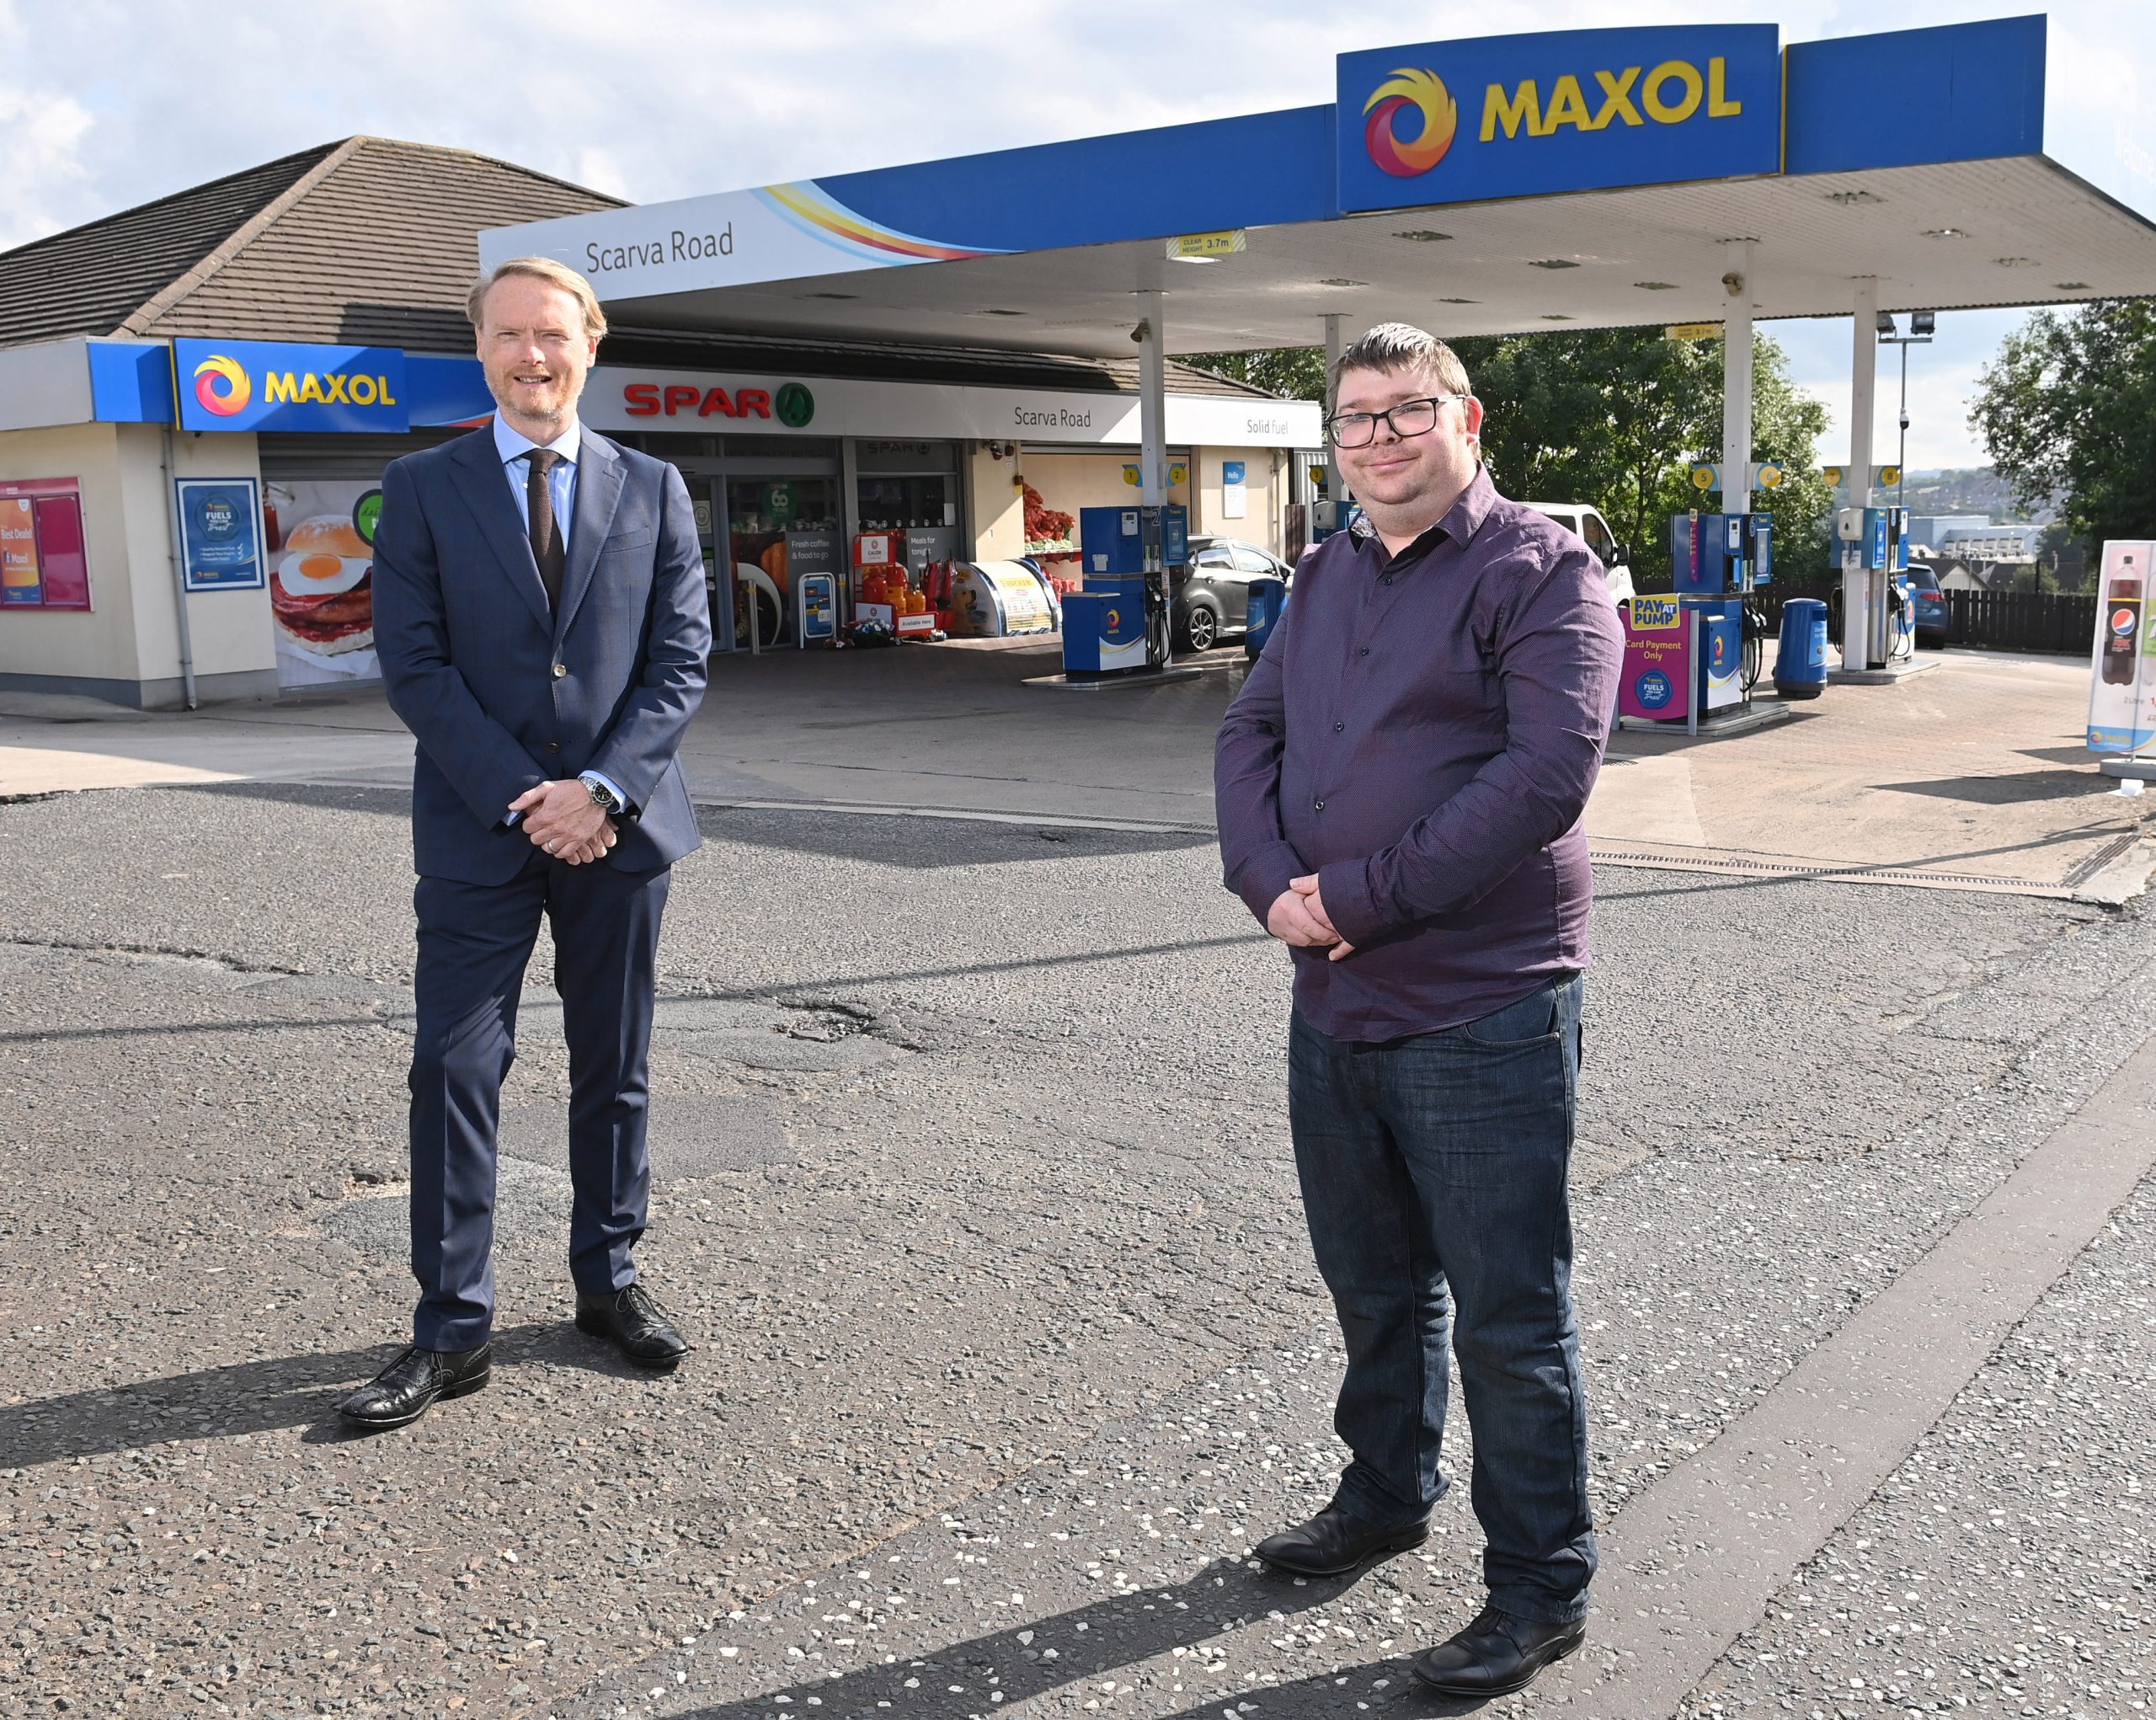 Maxol invests £35k in Scarva Road Service Station – new licensee appointed